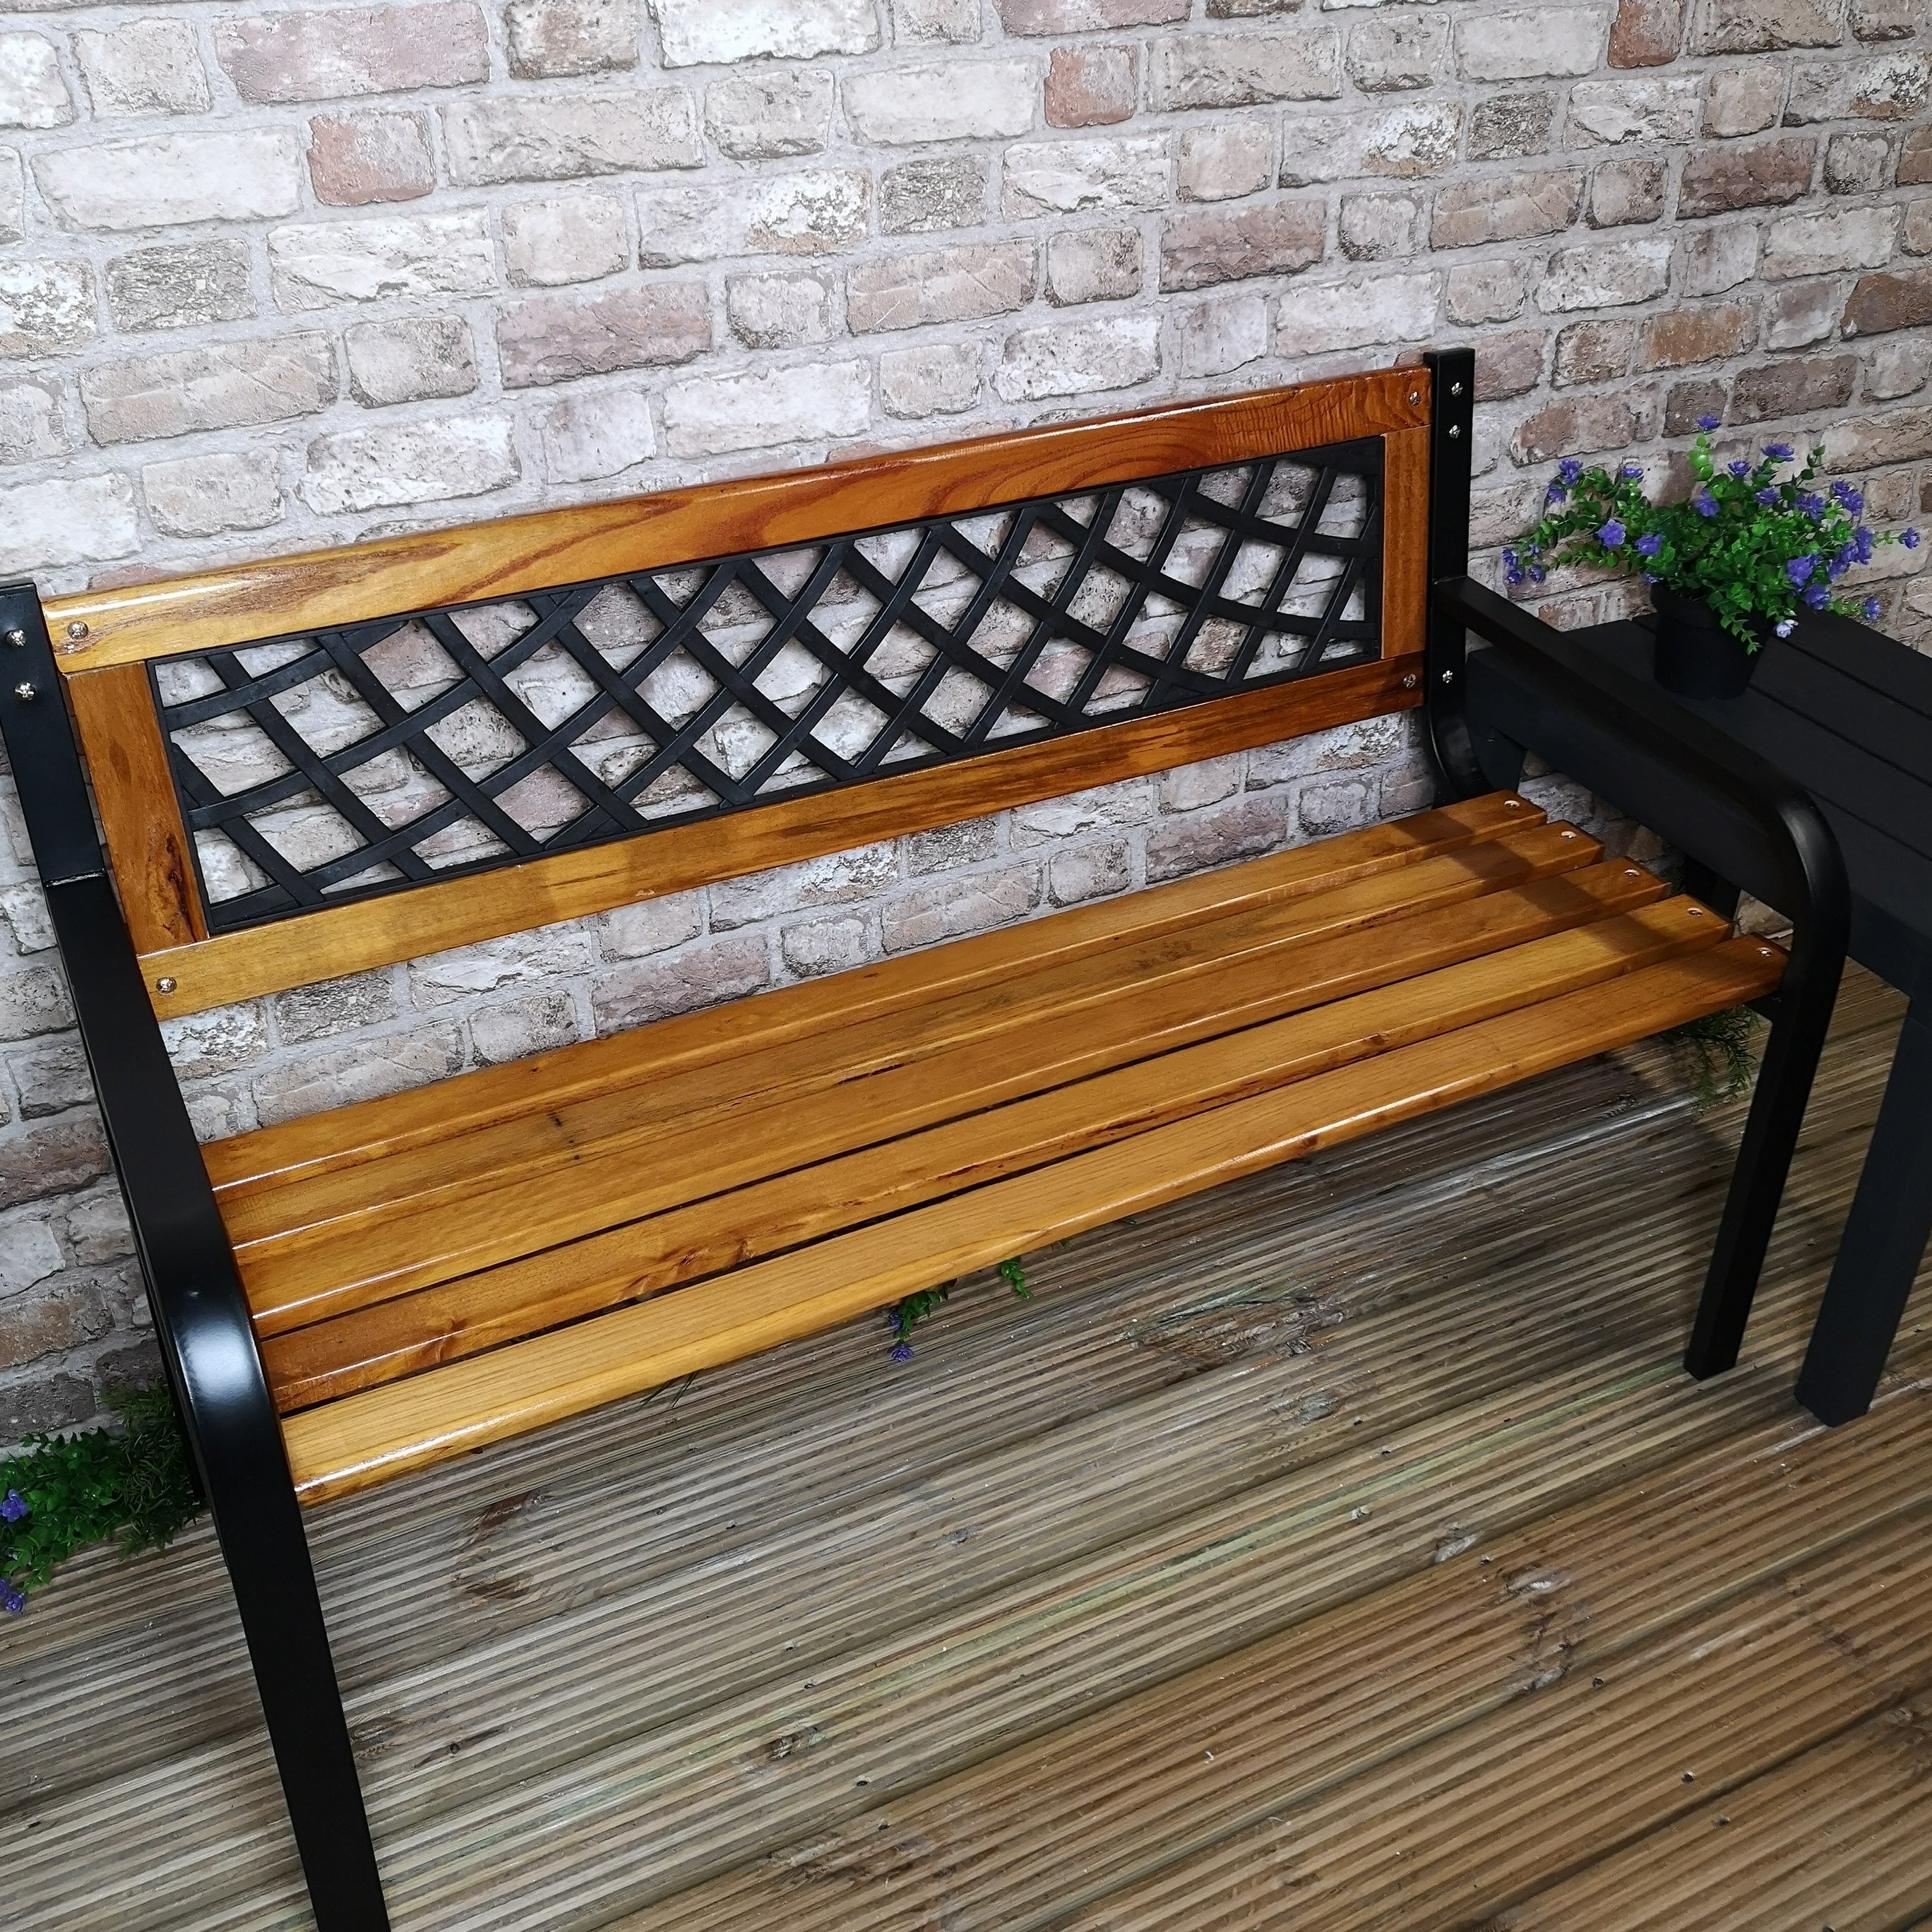 118cm Wooden 2 Seater Garden Bench with Metal Frame & Lattice Inlay